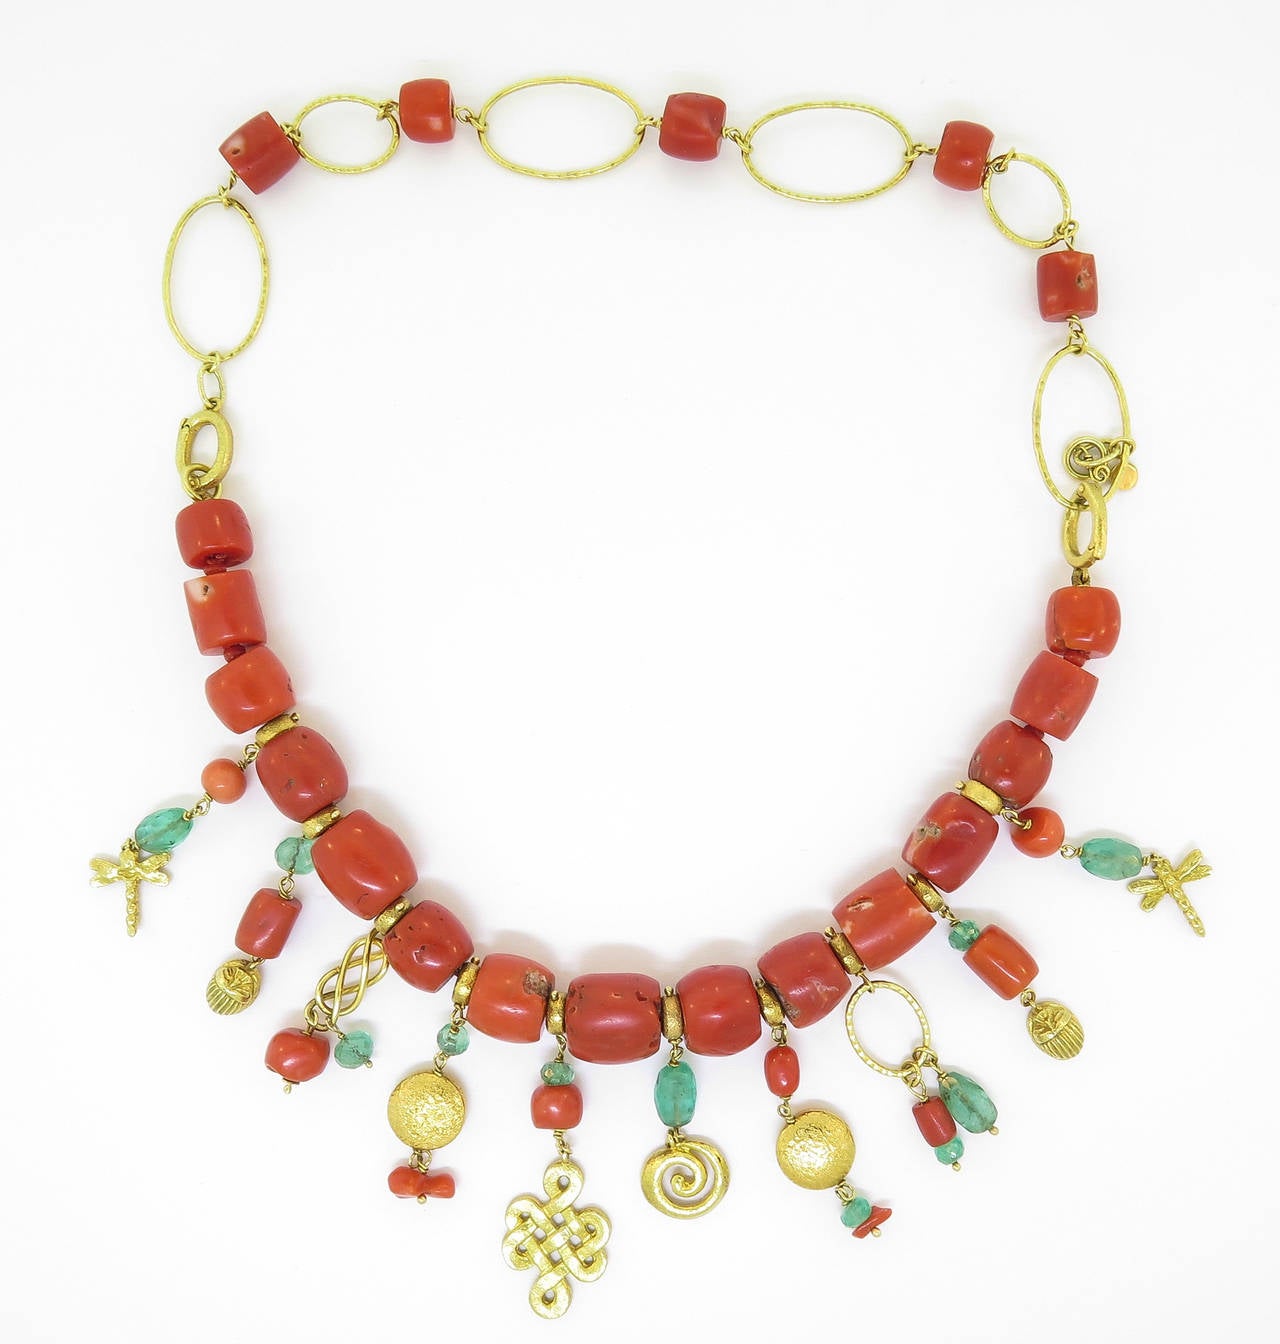 This whimsical necklace is handcrafted in 18K yellow gold featuring vintage coral and emerald beads.  The charms are inspired by the makers findings at numerous markets from the far corners of the world! It can also be worn as a bracelet.